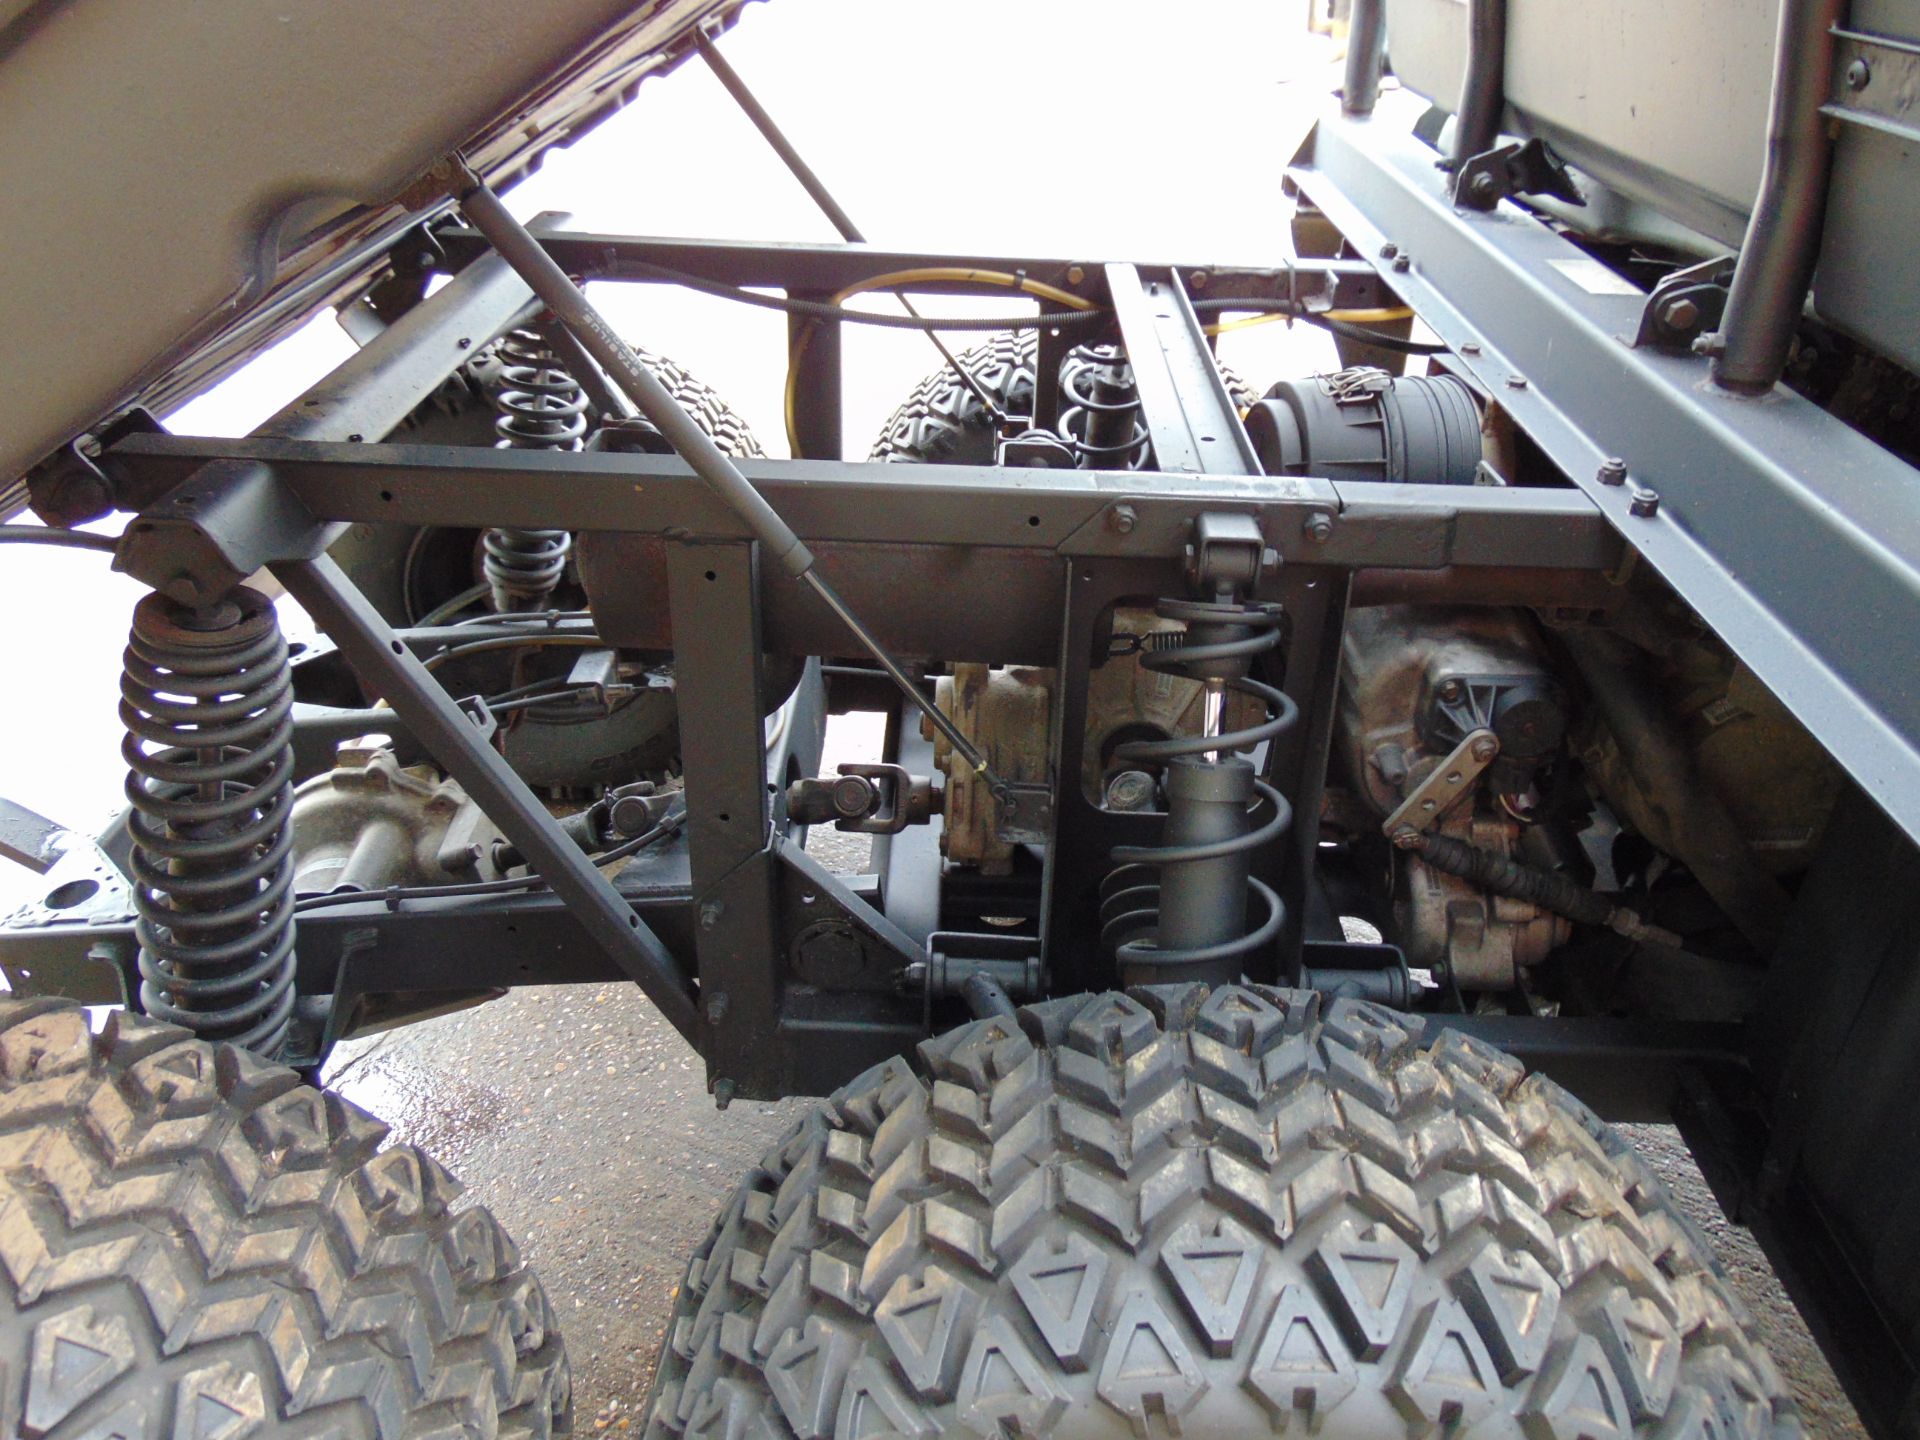 Polaris Ranger 6 x 6 Off-Road Utility Vehicle - Petrol Engine 555 hours Rec from Nat Grid - Image 23 of 30